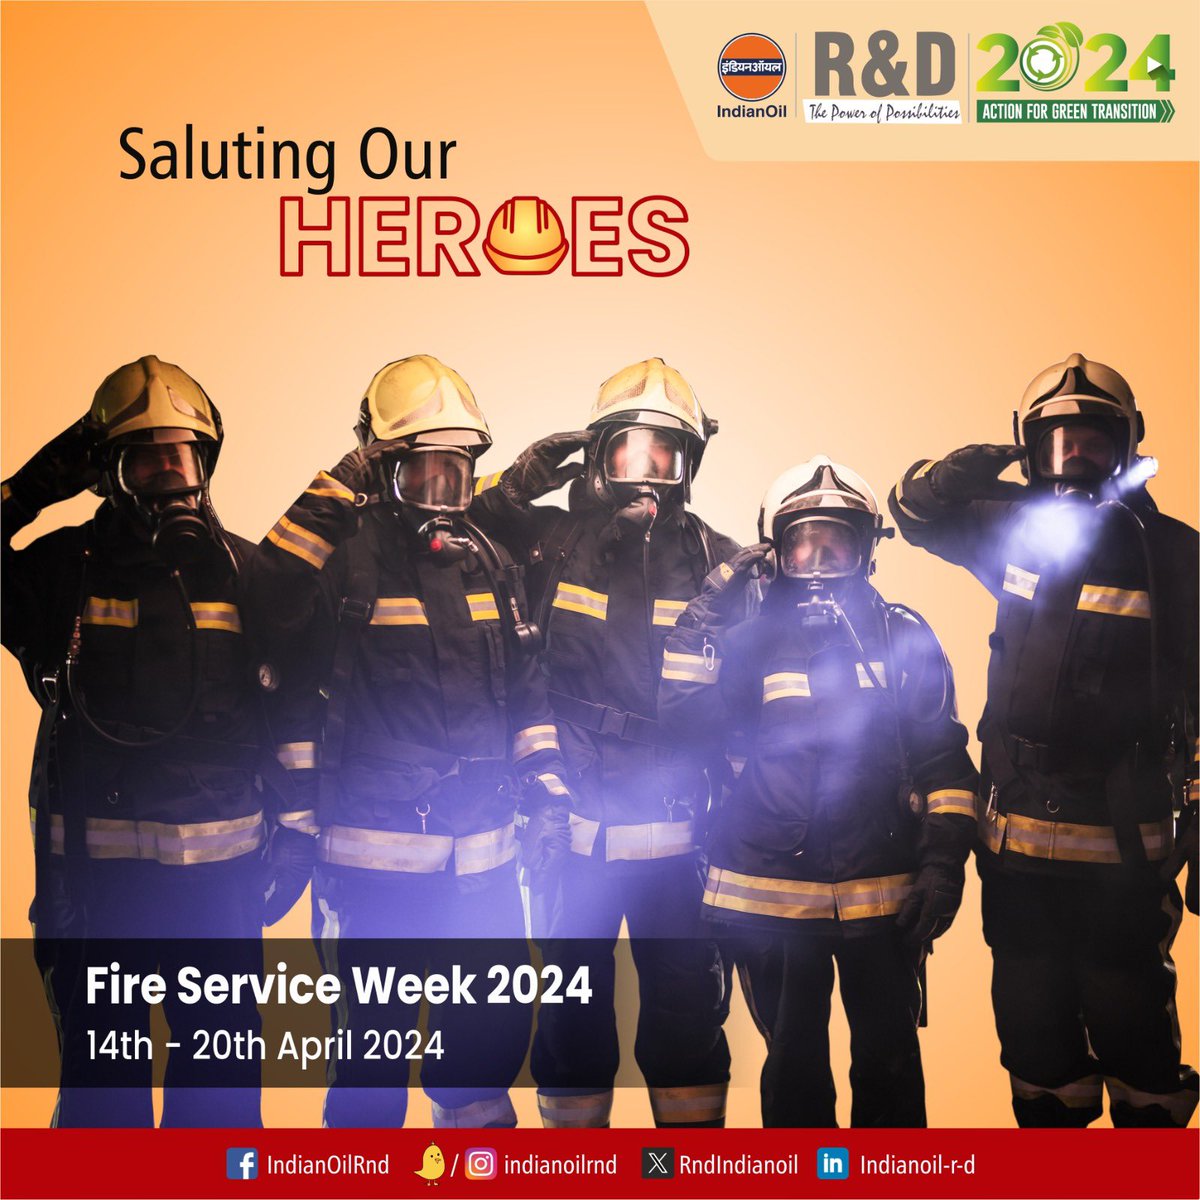 1/2 Honoring the bravery of our firefighting heroes! IndianOil R&D proudly acknowledges the unwavering dedication and bravery of our firefighters.